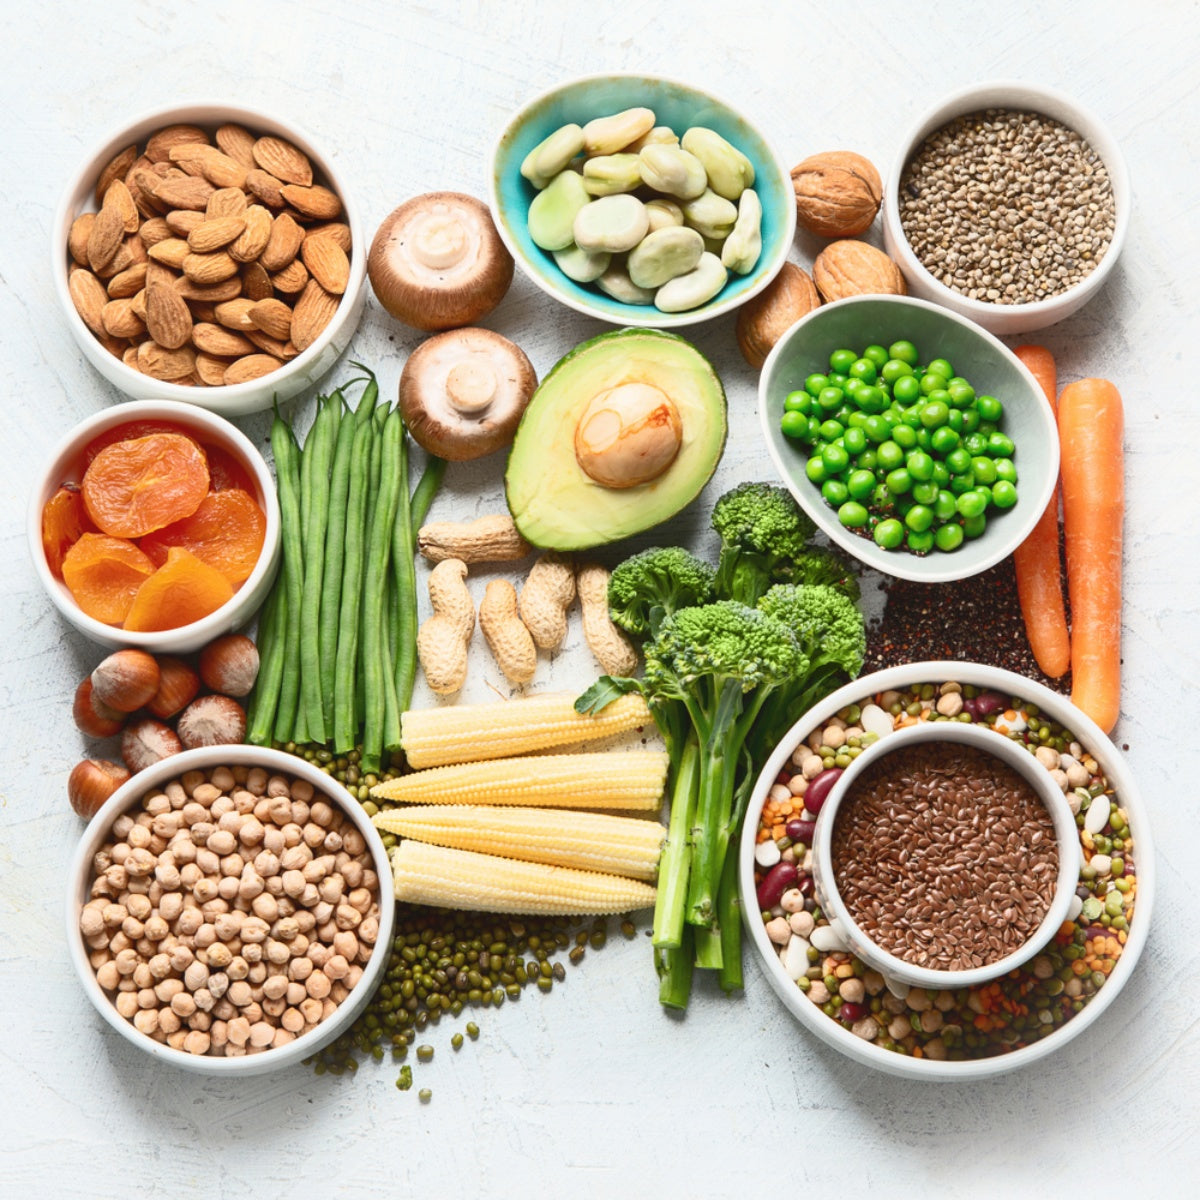 A selection of plant-based food options